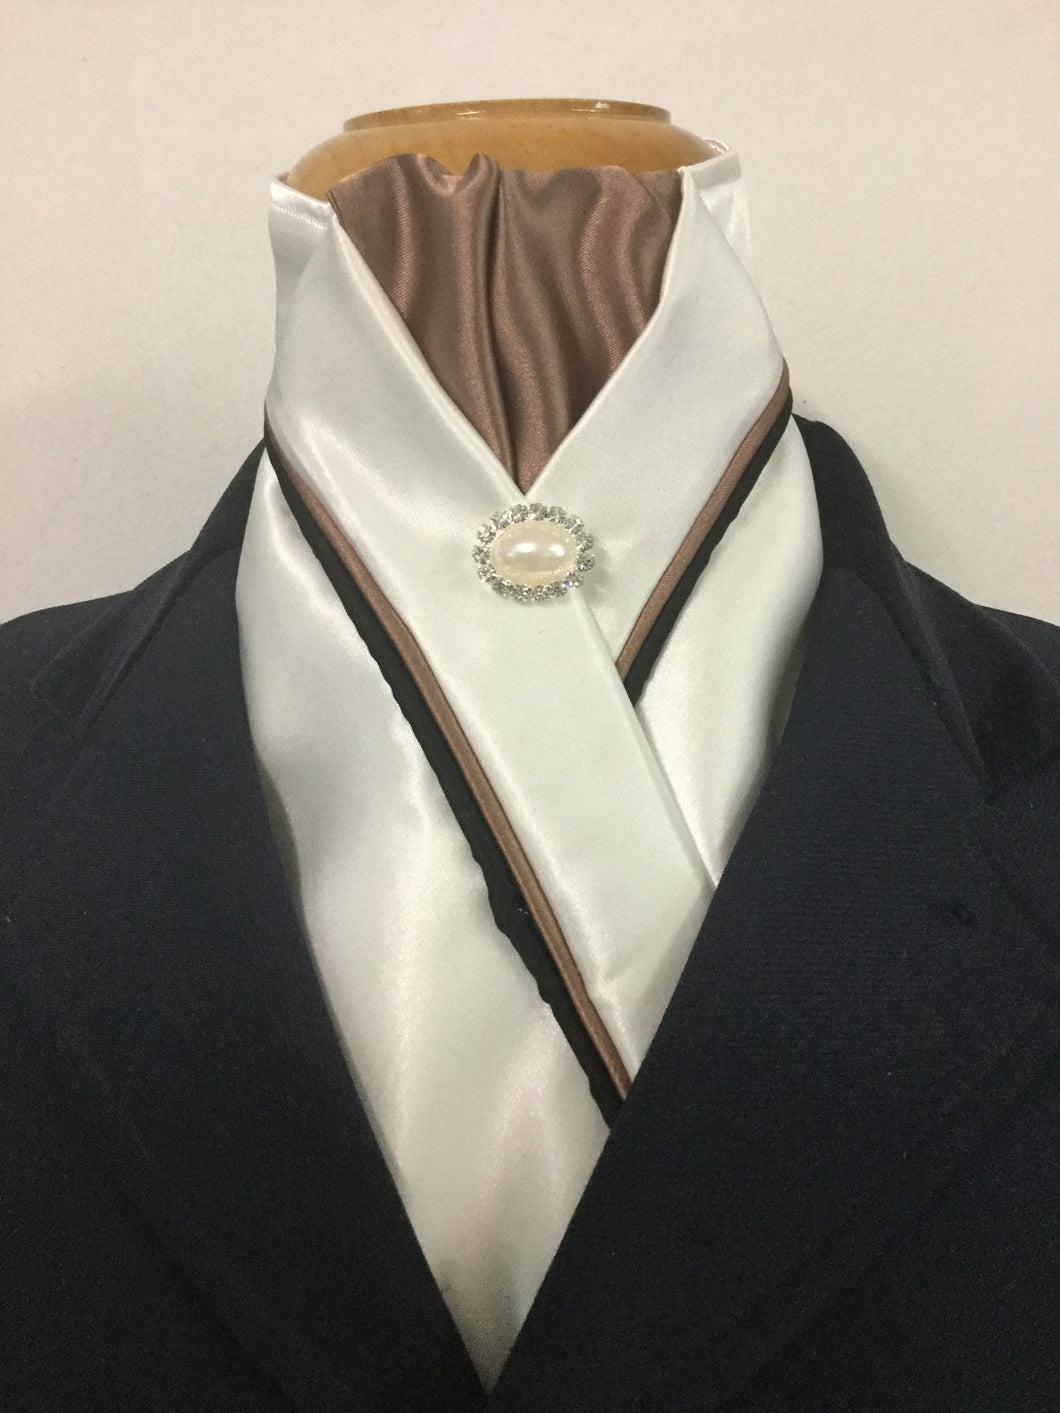 HHD Ivory Cream Custom Stock Tie in Antique Gold & Black Pearl Pin